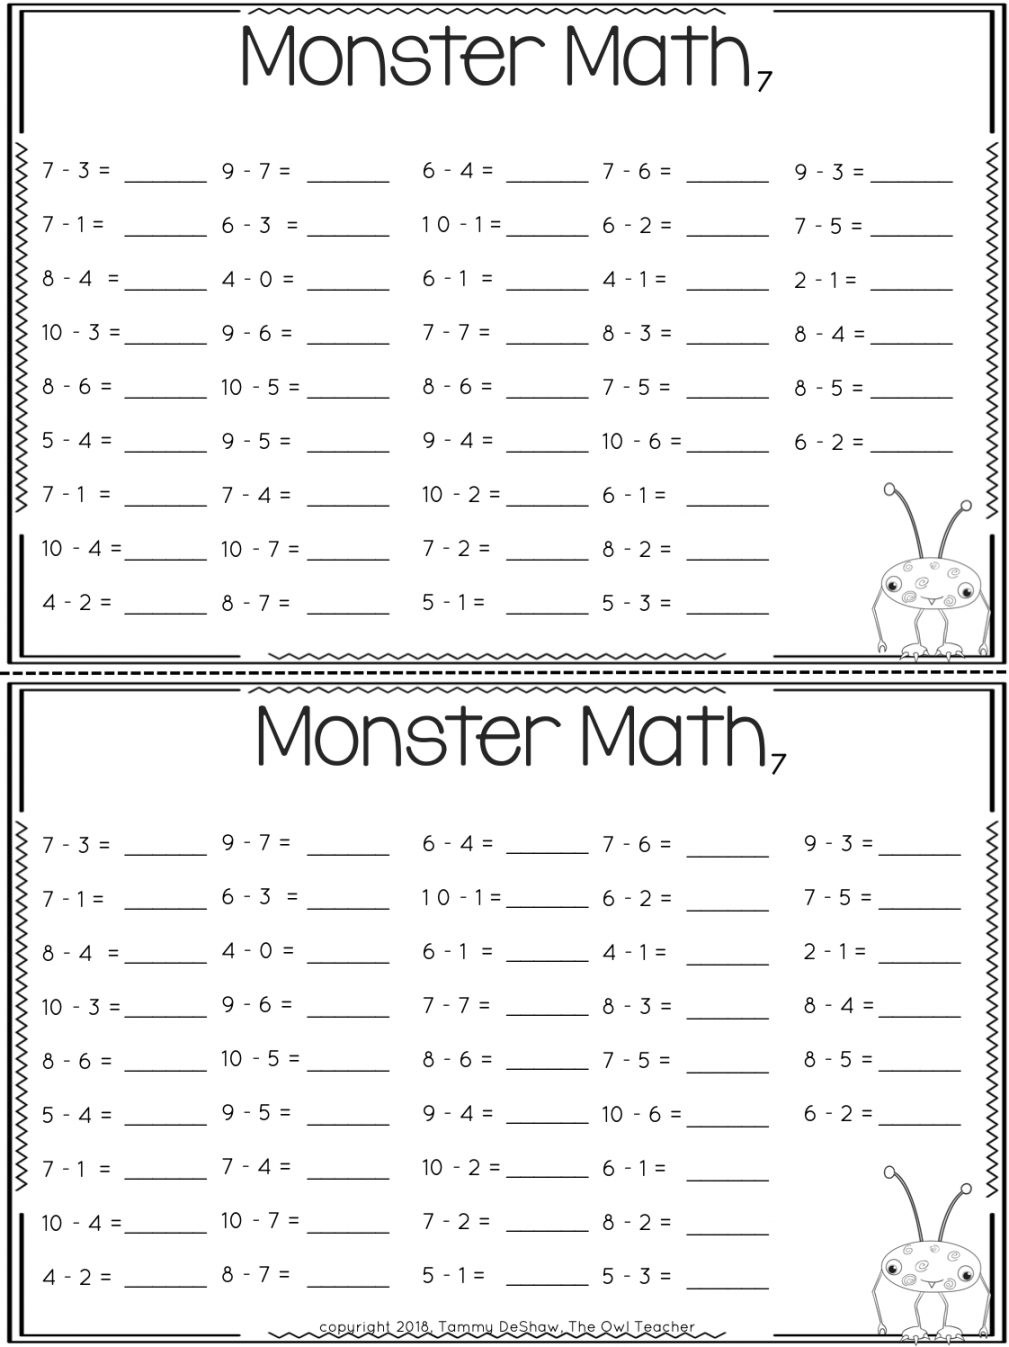 Addition and Subtraction Fact Fluency Practice - The Owl Teacher